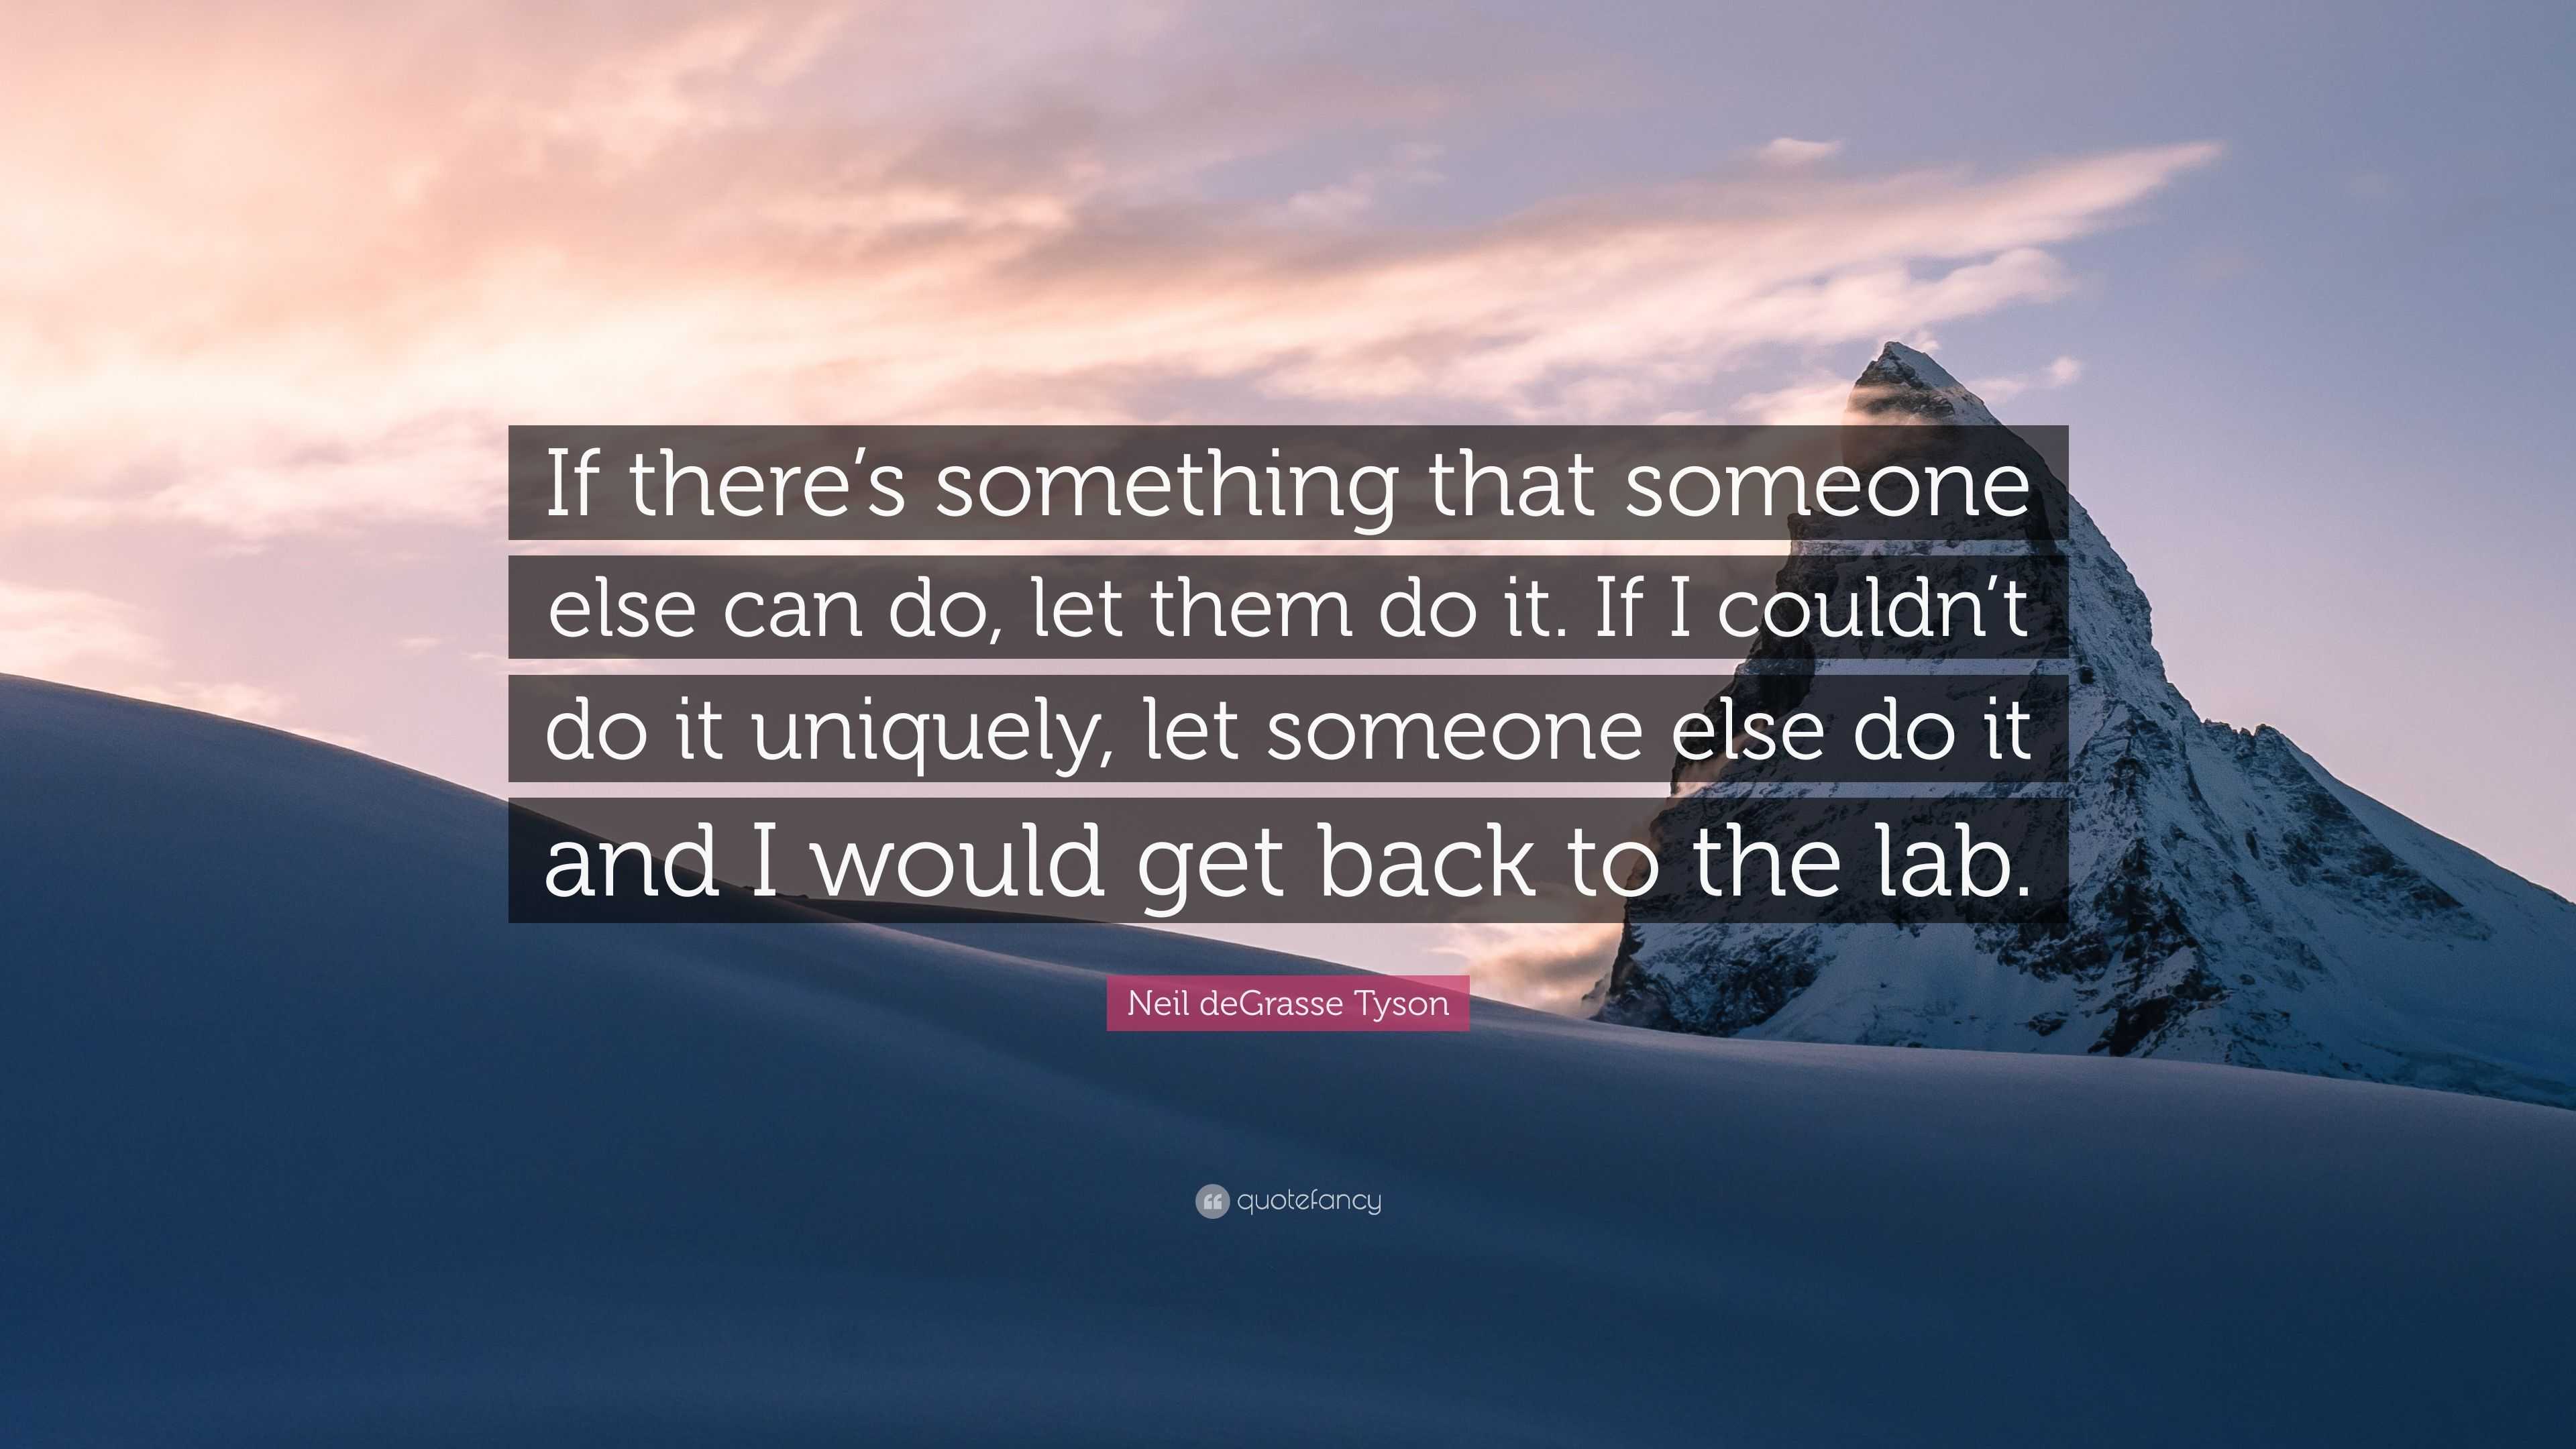 Neil deGrasse Tyson Quote: “If there’s something that someone else can ...